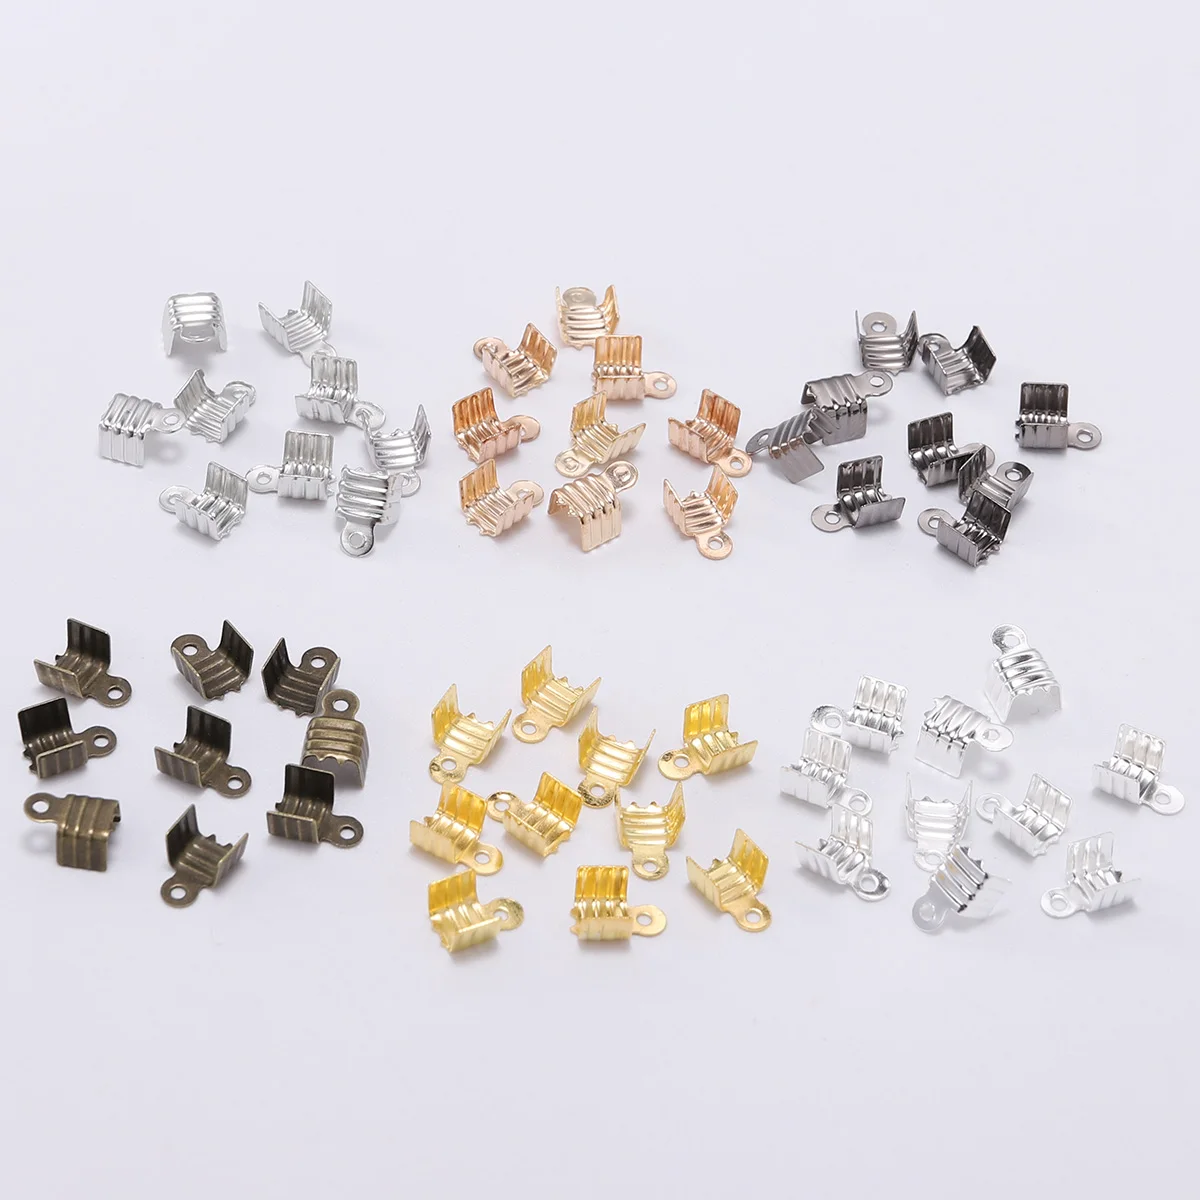 

200pcs/lot 3 4 5 8mm Gold Small Cord End Tip Fold Clasp Crimp Bead Connector For DIY Jewelry Making Finding Cord Buckle Supplies